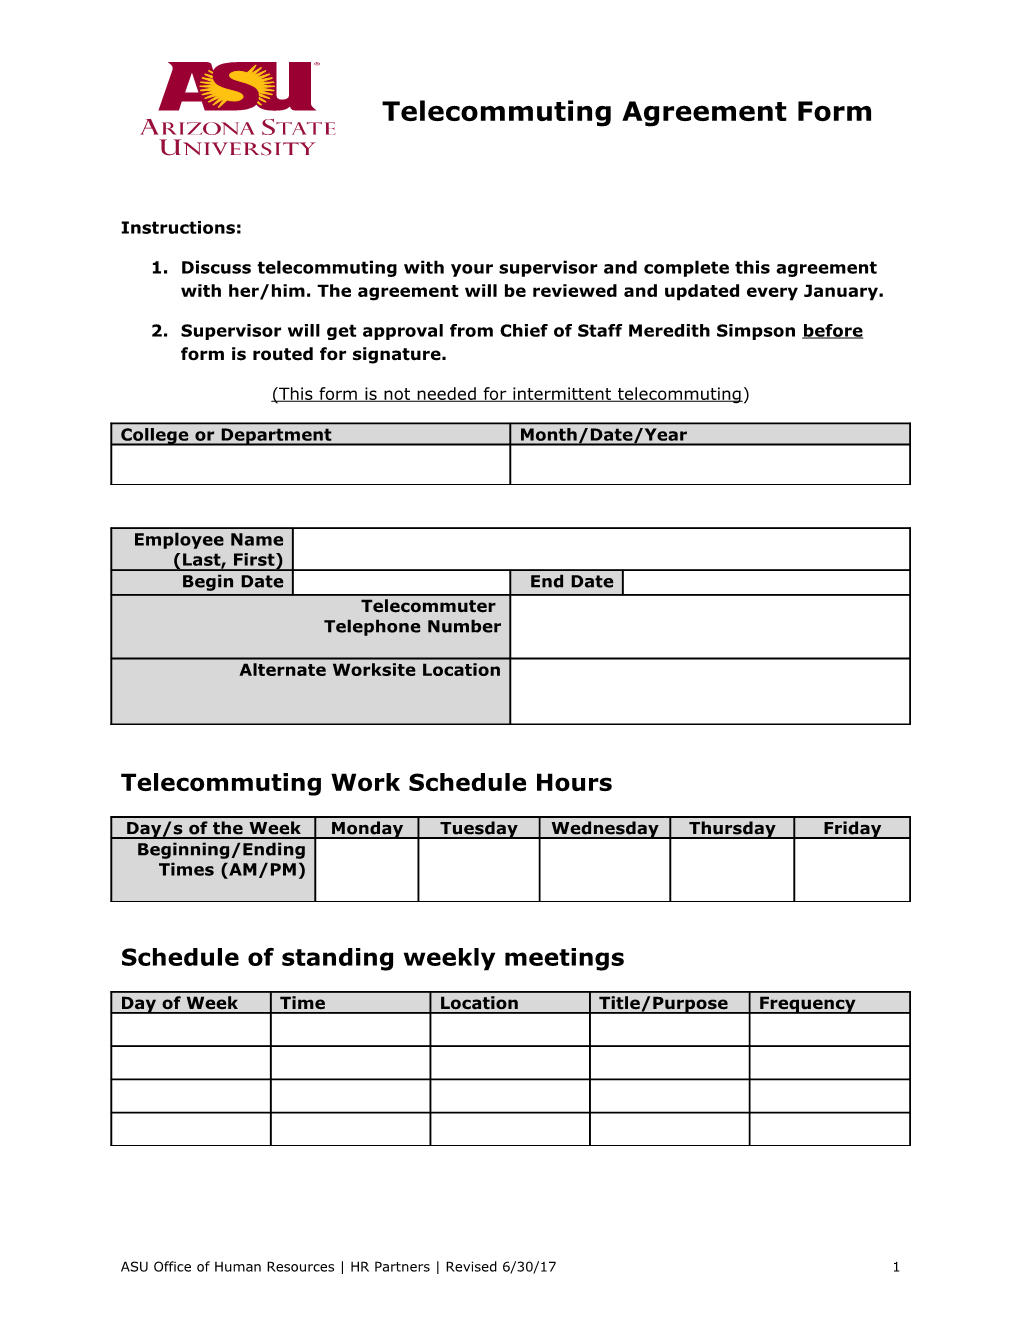 This Form Is Not Needed for Intermittent Telecommuting